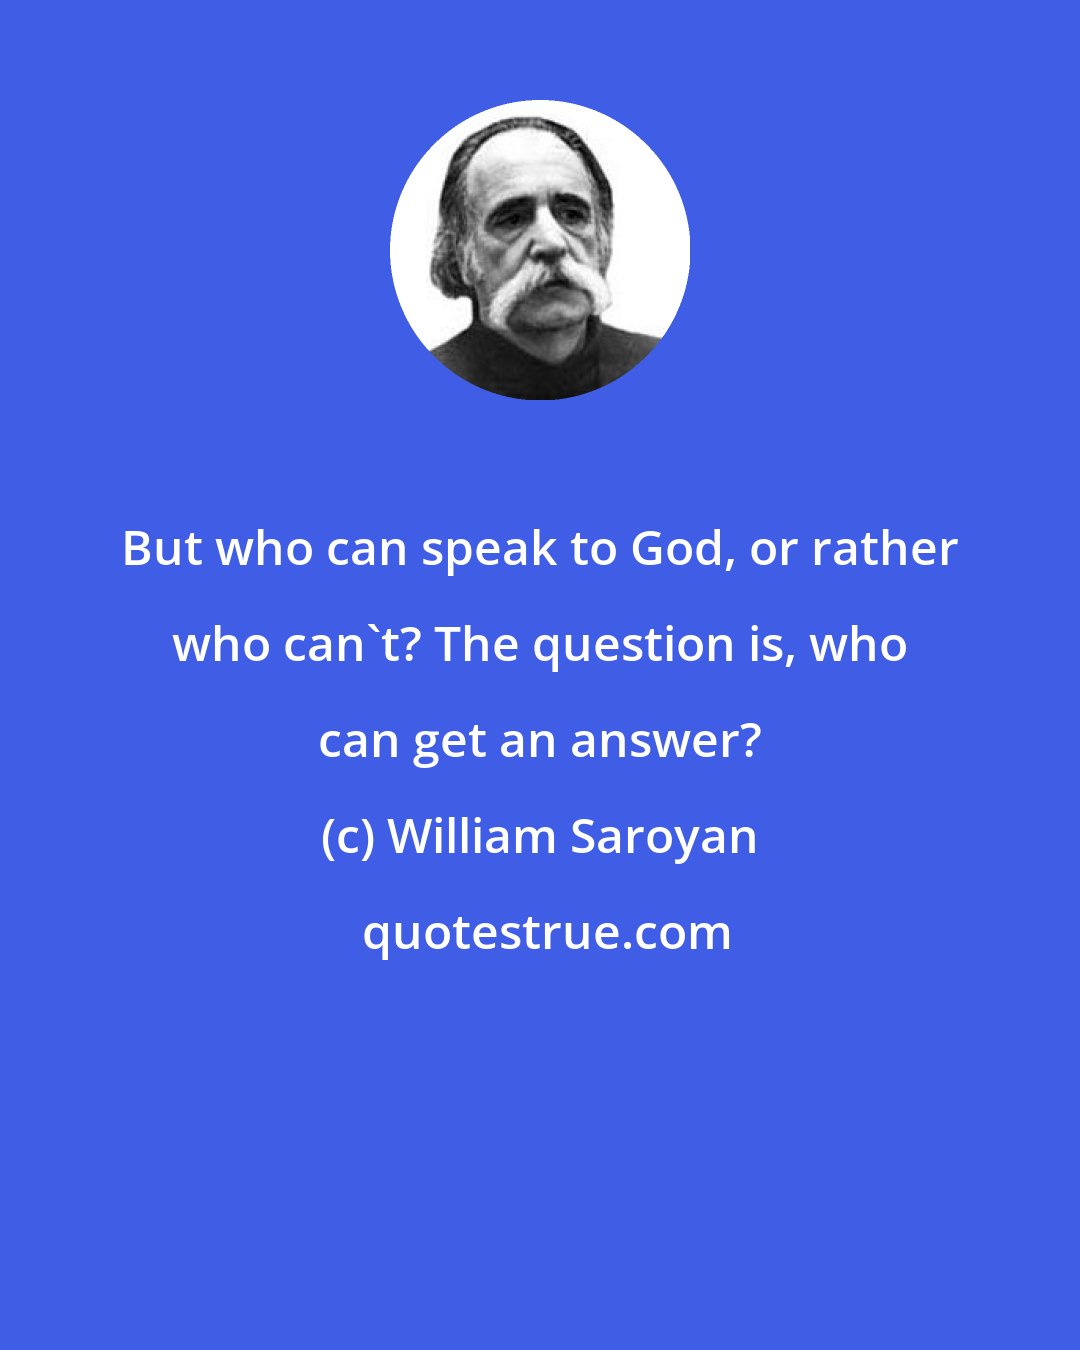 William Saroyan: But who can speak to God, or rather who can't? The question is, who can get an answer?